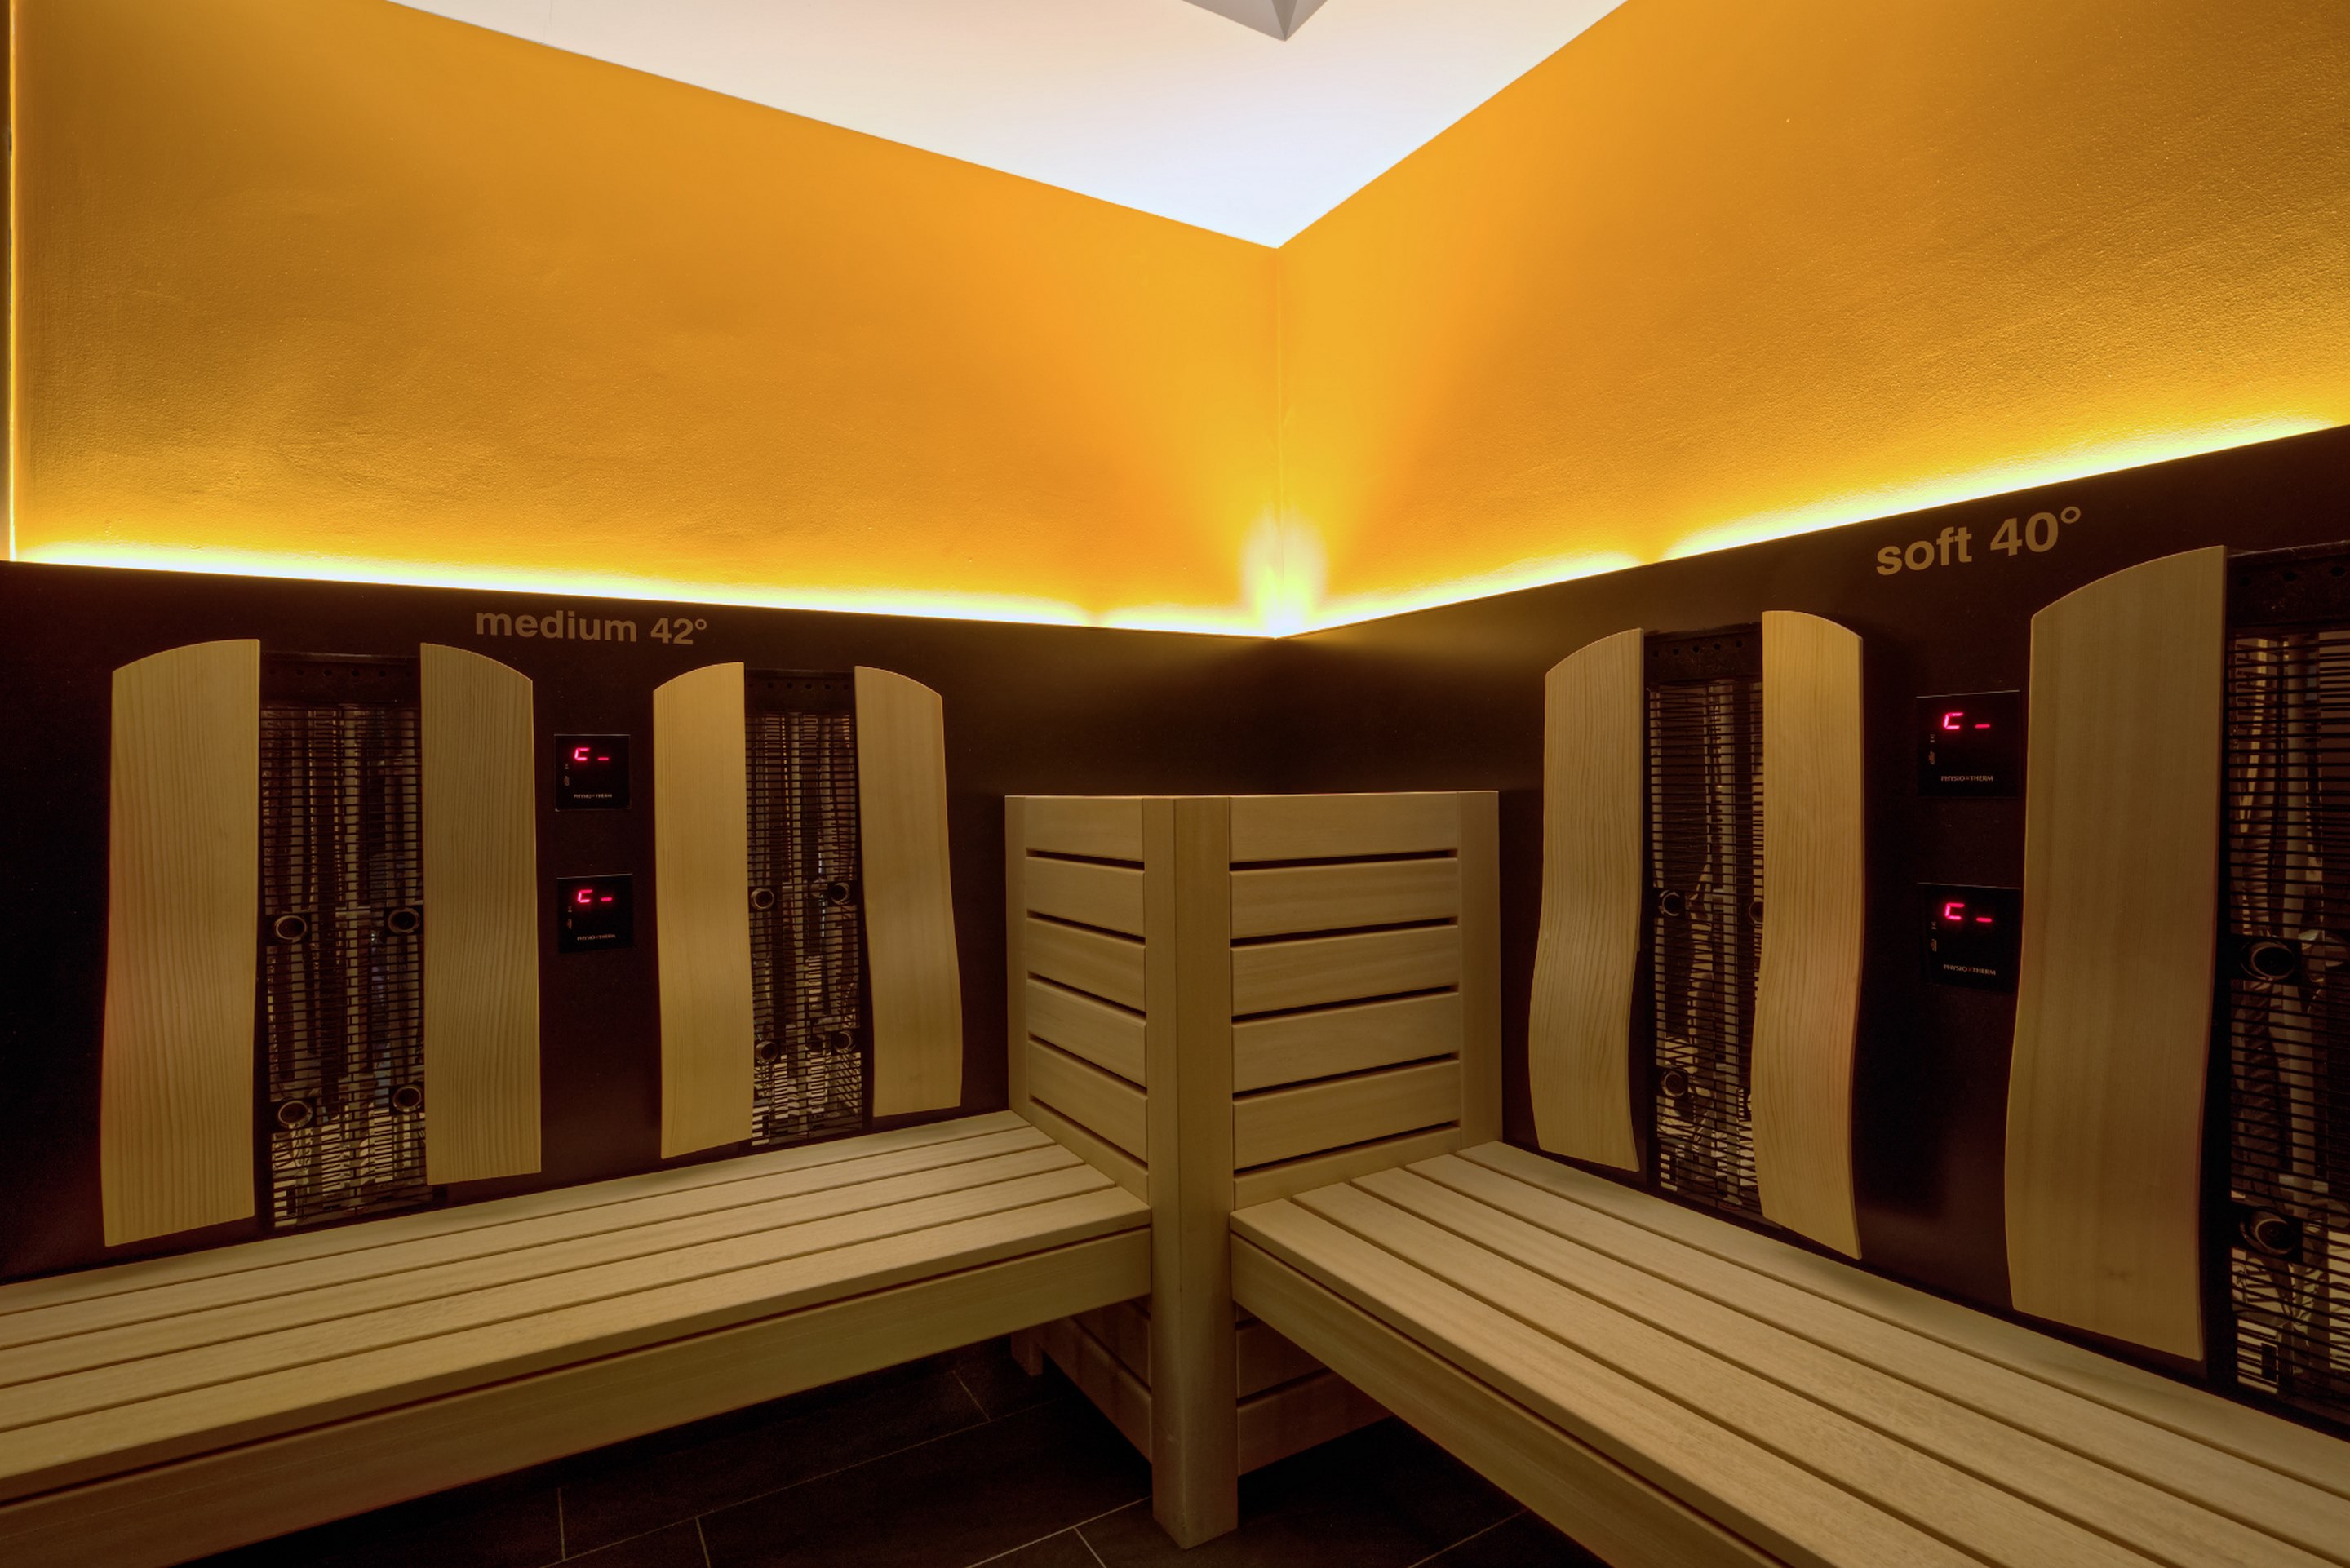 Sauna at our wellness hotel in Val Pusteria/Pustertal